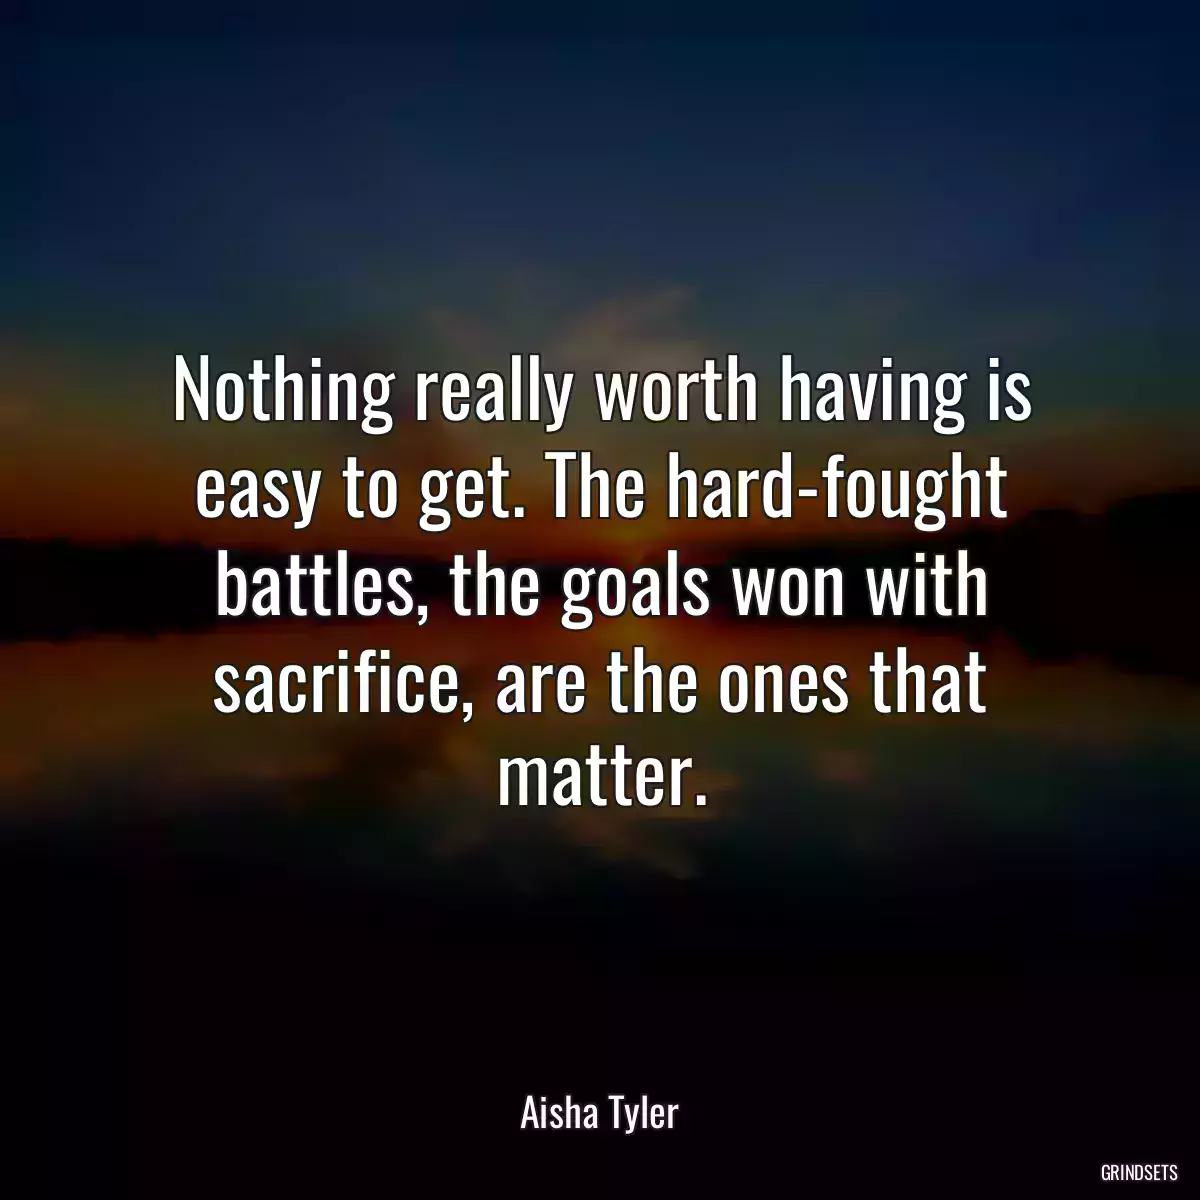 Nothing really worth having is easy to get. The hard-fought battles, the goals won with sacrifice, are the ones that matter.